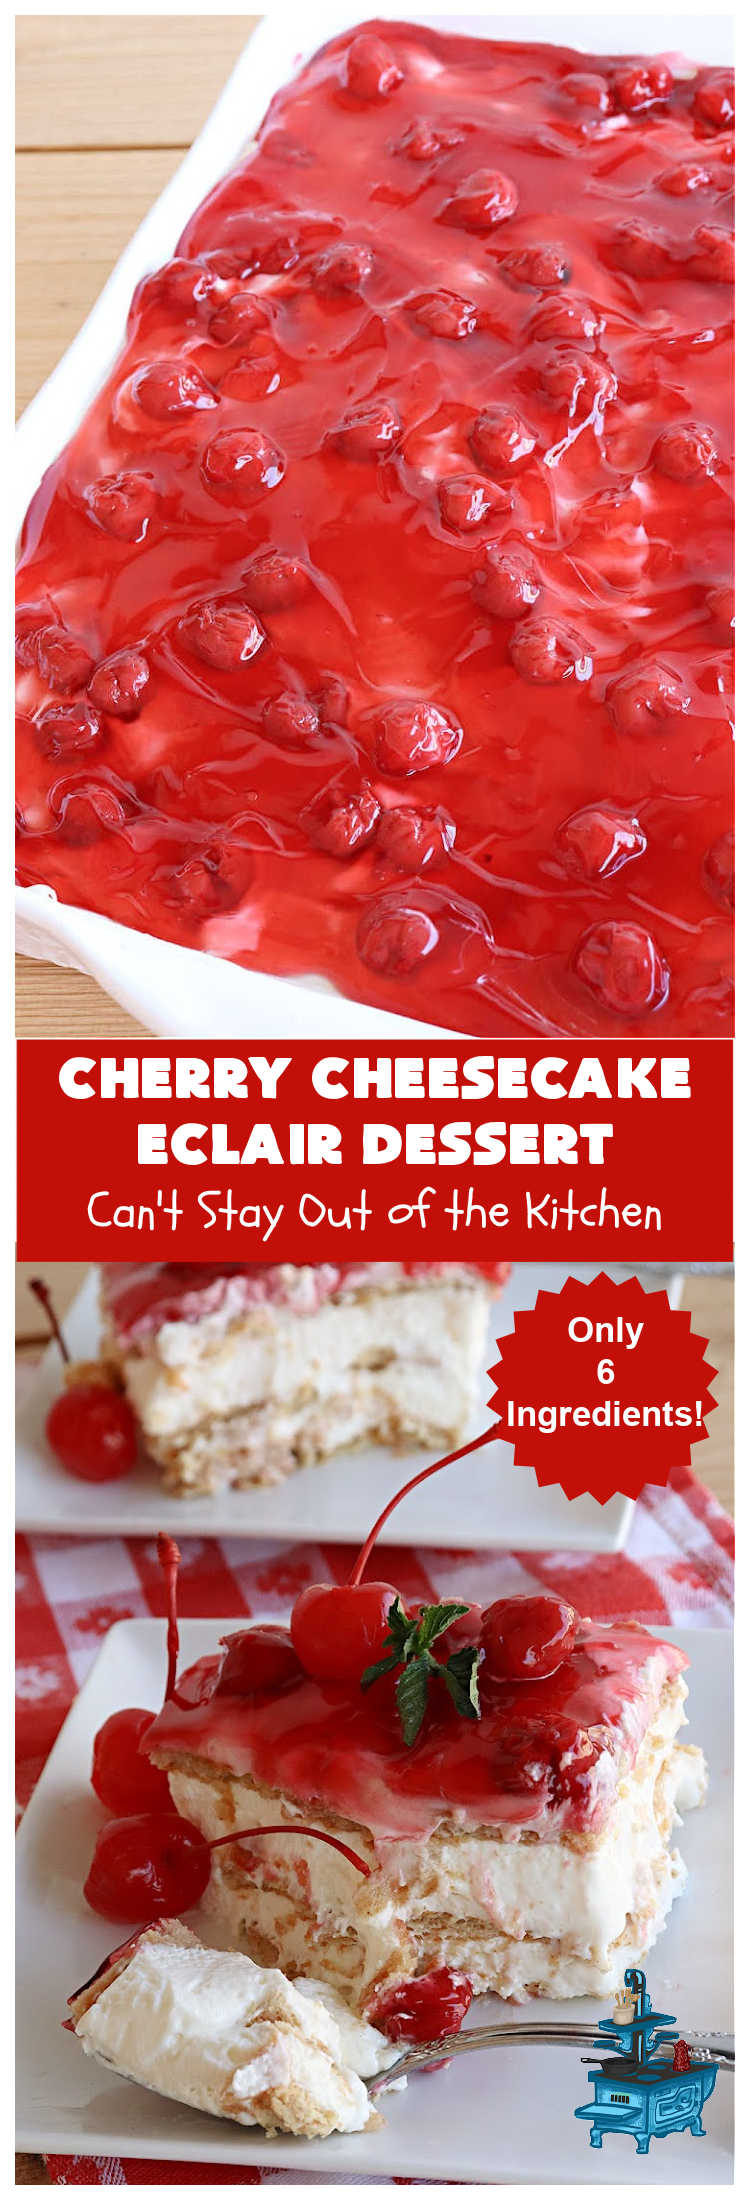 Cherry Cheesecake Éclair Dessert | Can't Stay Out of the Kitchen | this is an awesome #dessert to wow your family, friends and company for any social gathering. It's a #SixIngredientRecipe  & easily whipped up in about 10 minutes. This #CherryDessert will have you swooning from the first bite. #ÉclairDessert #CherryCheesecakeÉclairDessert #Éclairs #CherryPieFilling #Cheesecake #CheesecakePuddingMix